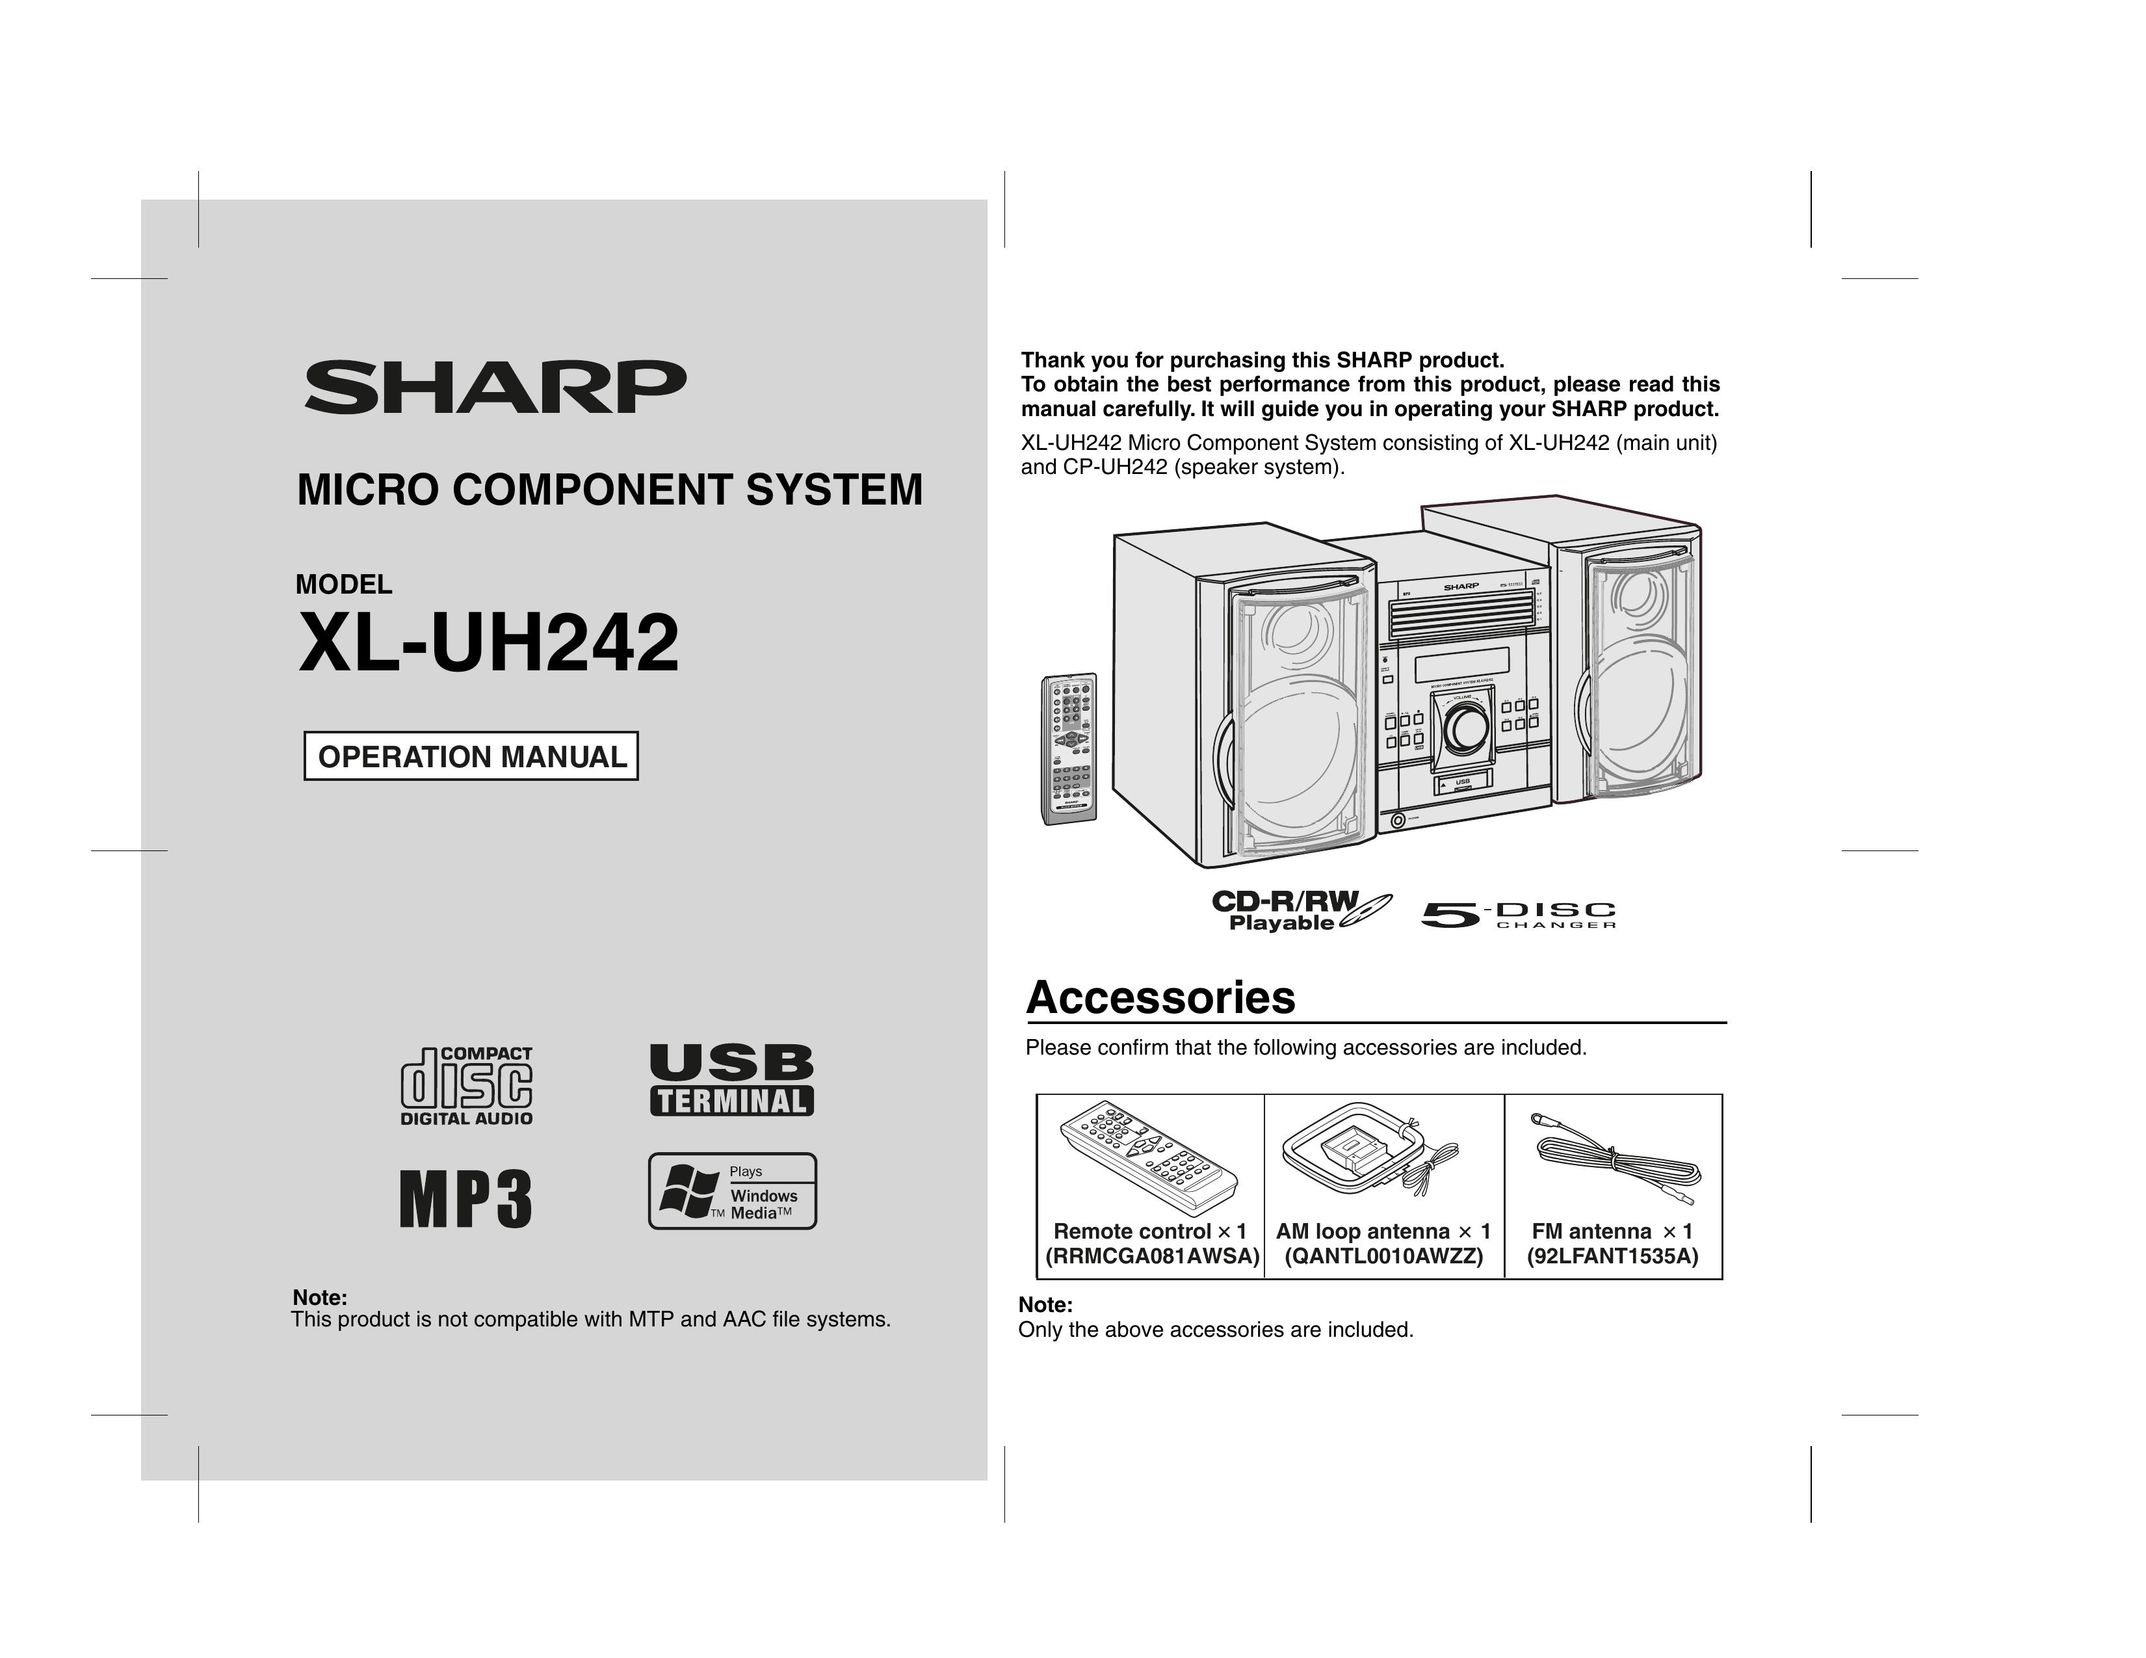 Sharp XL-UH242 Home Theater System User Manual